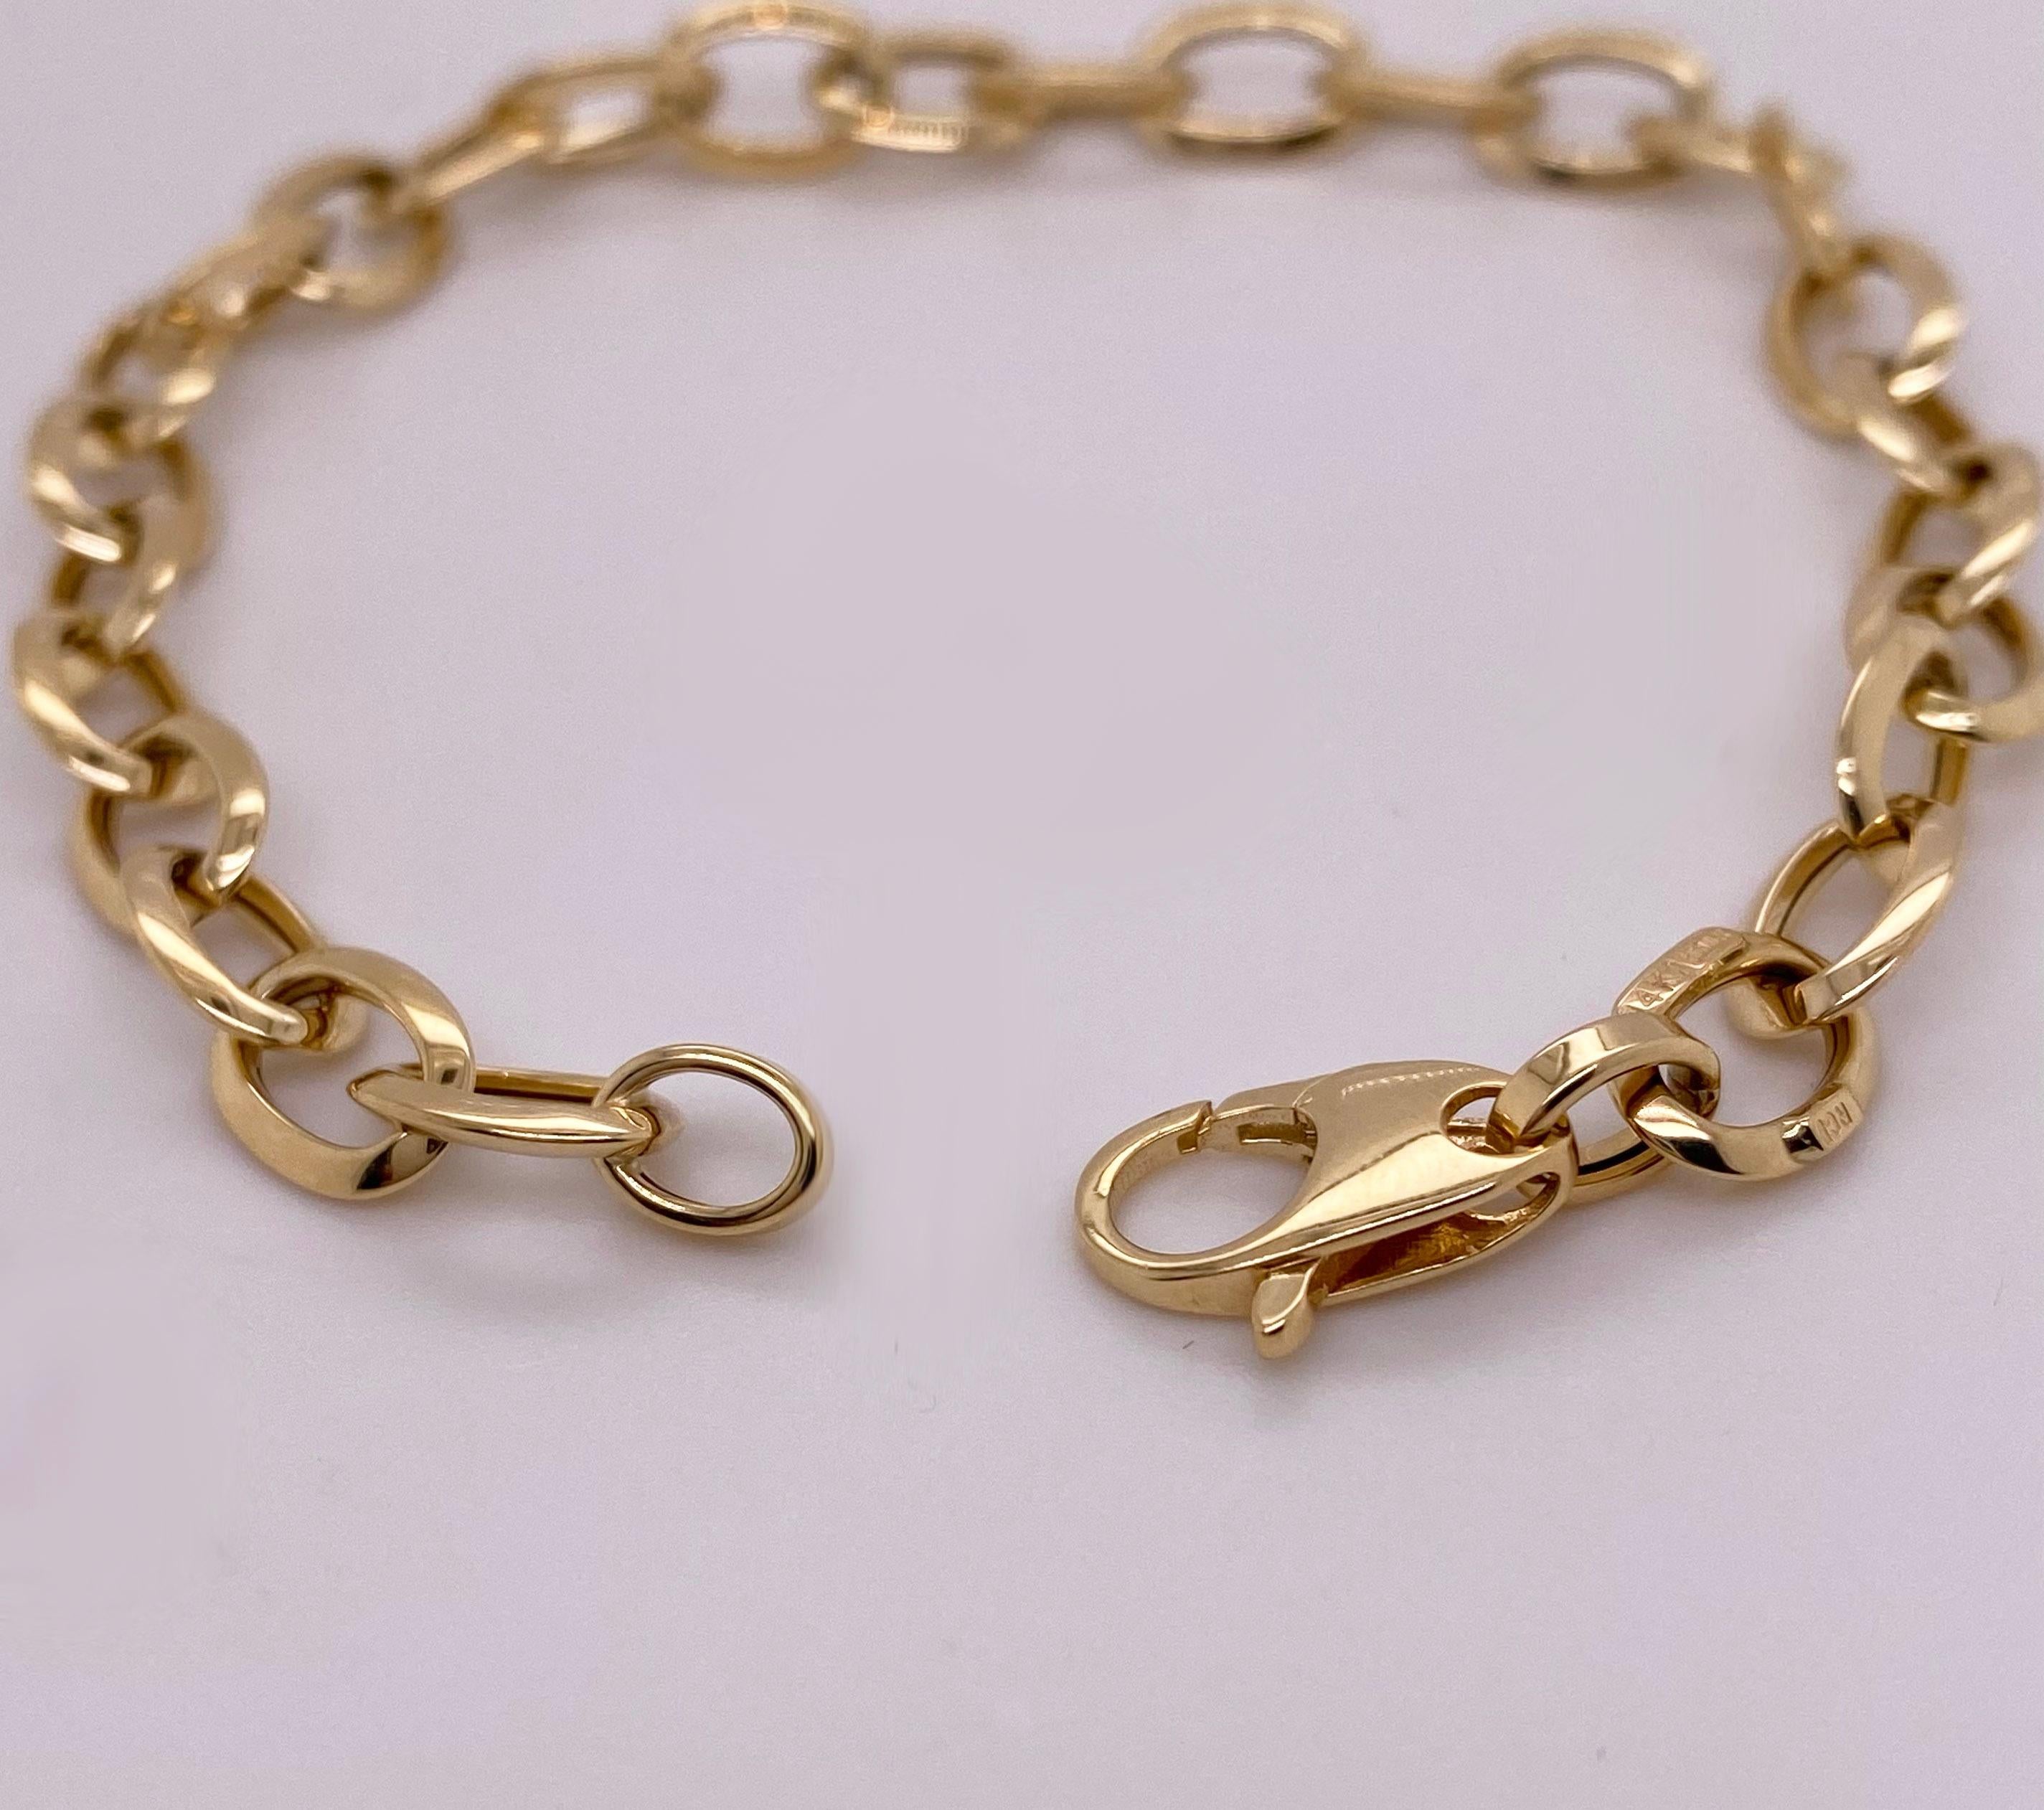 Gold chains are back and better than ever! This 14 karat yellow gold chain bracelet is one of the top trending chain designs in fashion jewelry! The gold cable chain is a wide design that adds weight to any 
The details for this gorgeous bracelet